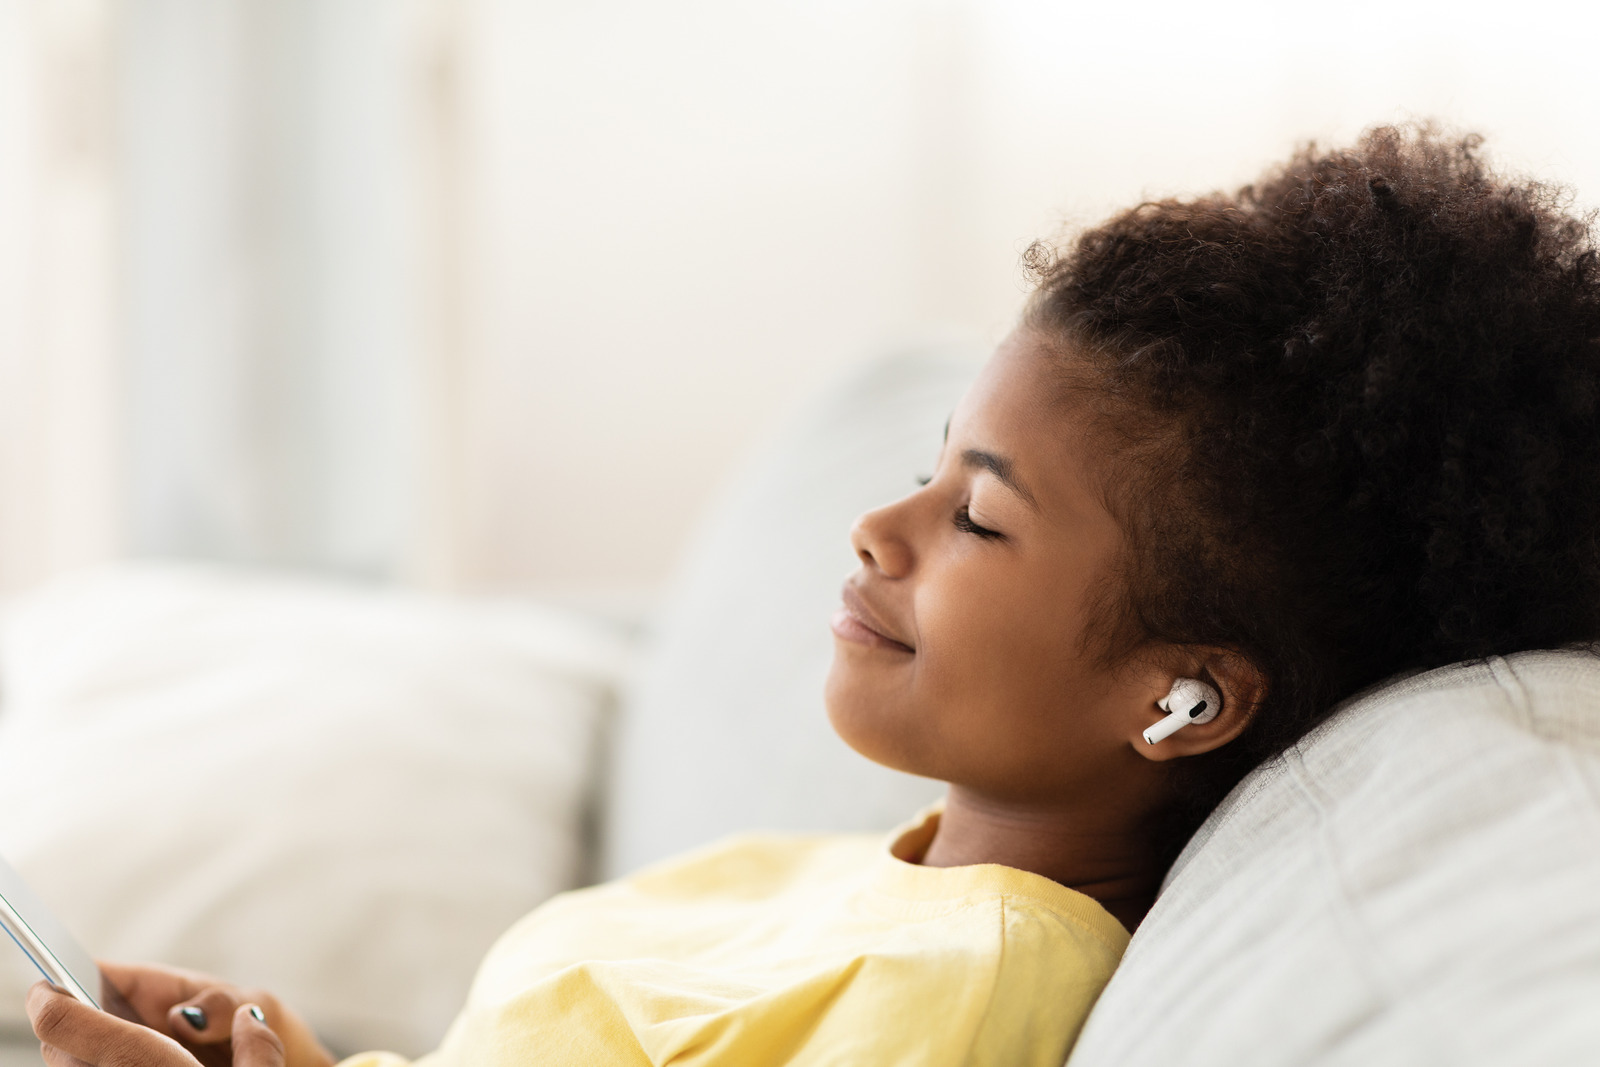 Black Teen Girl Listening To Music Wearing Earbuds Earphones Relaxing Sitting On Couch At Home. Free Space